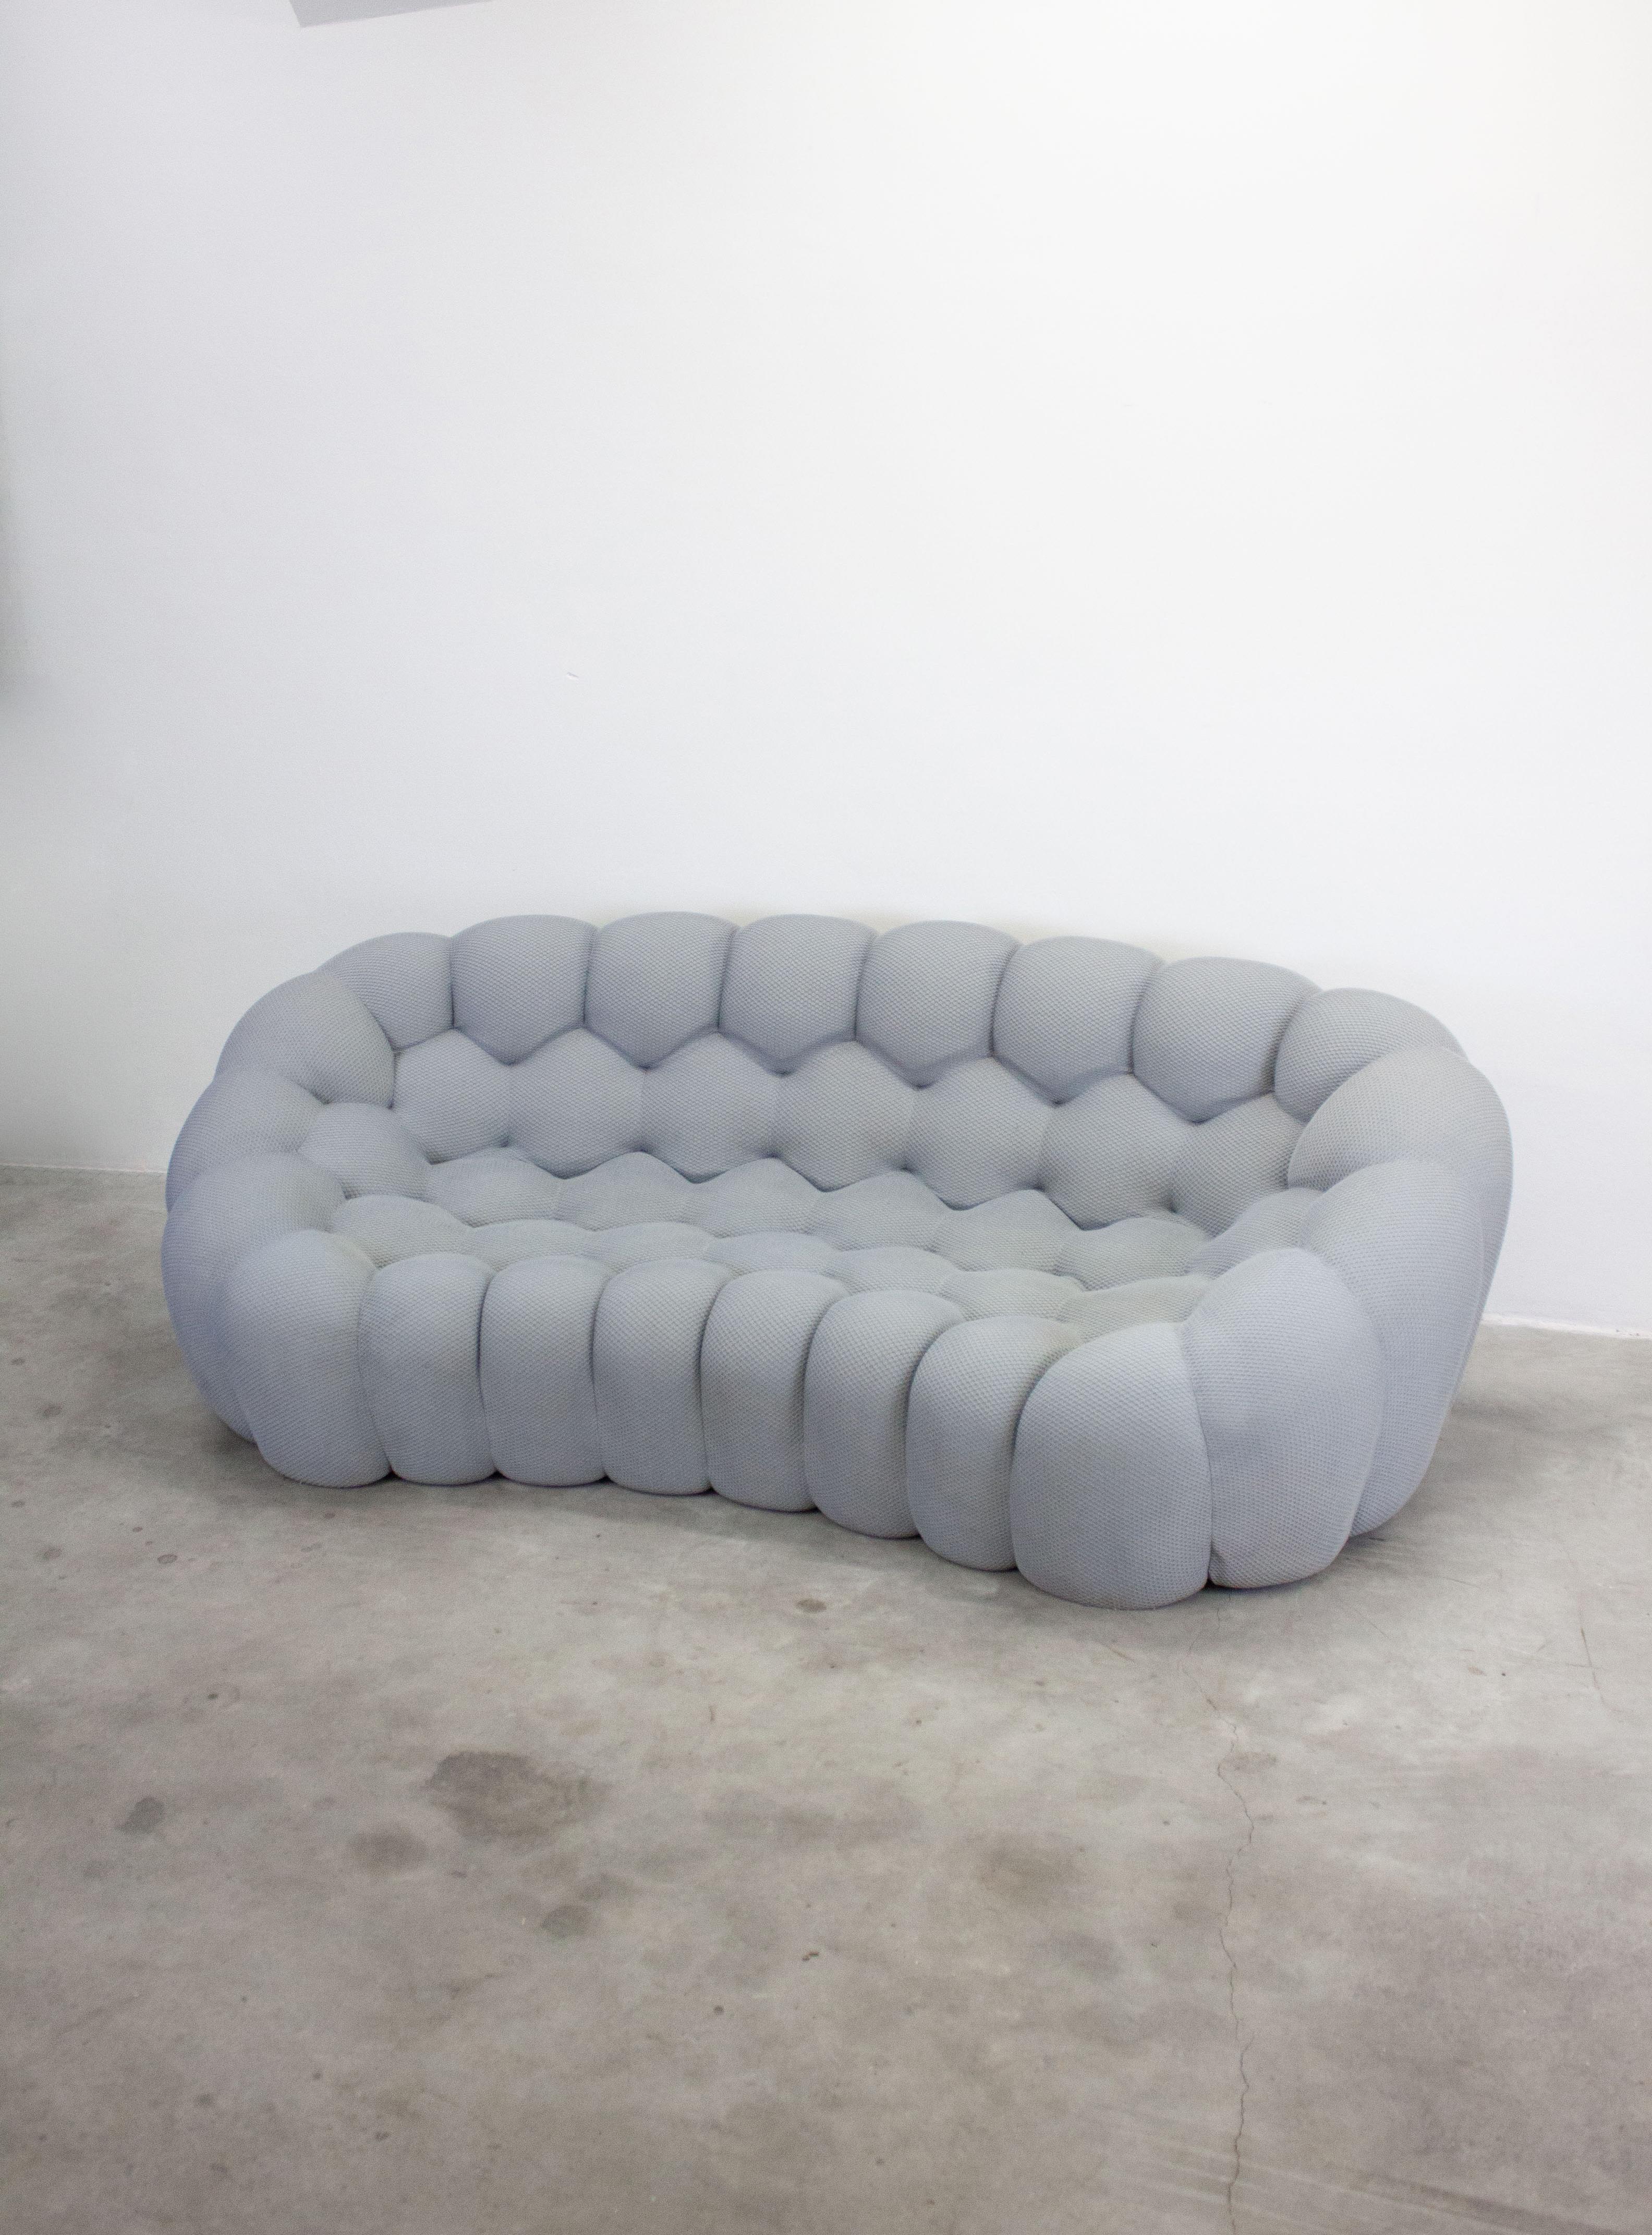 The Bubble Sofa expresses the balance between innovation, function and emotion. Designed by Sacha Lakic who has a passion for cutting-edge technology was inspired by natural and mineral forms. The bubble design required the development of specific